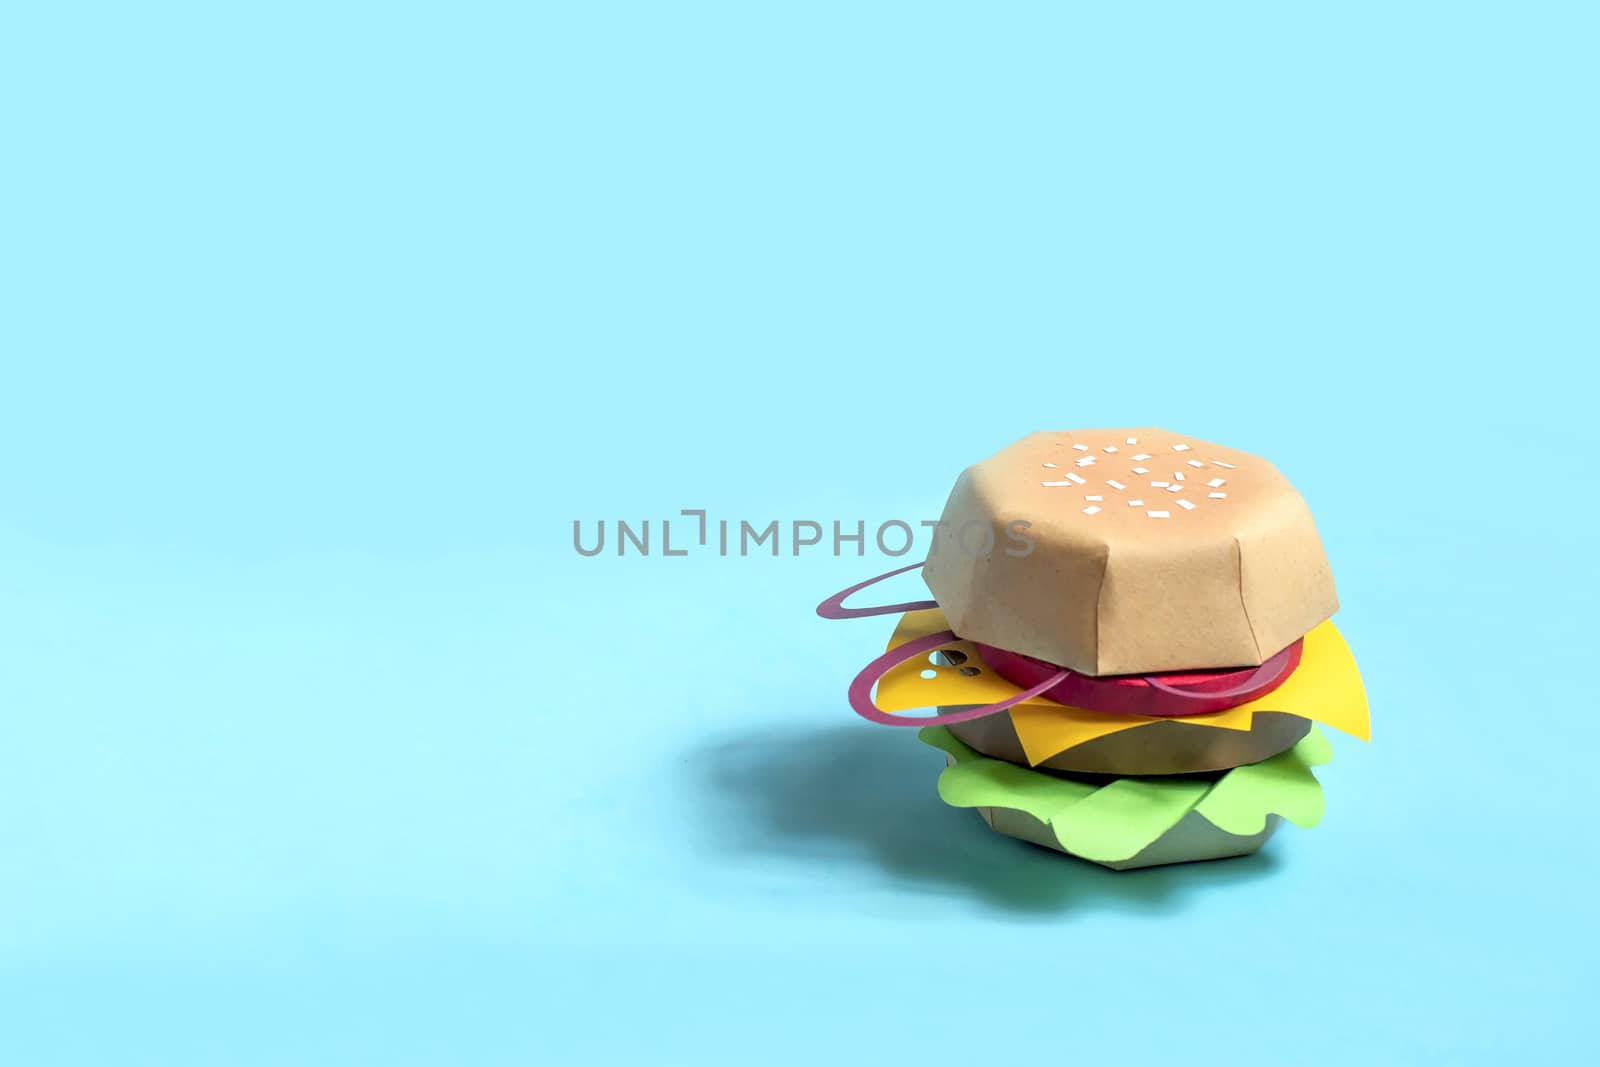 Hamburger made of paper. Real volumetric handmade paper objects. Paper art and craft